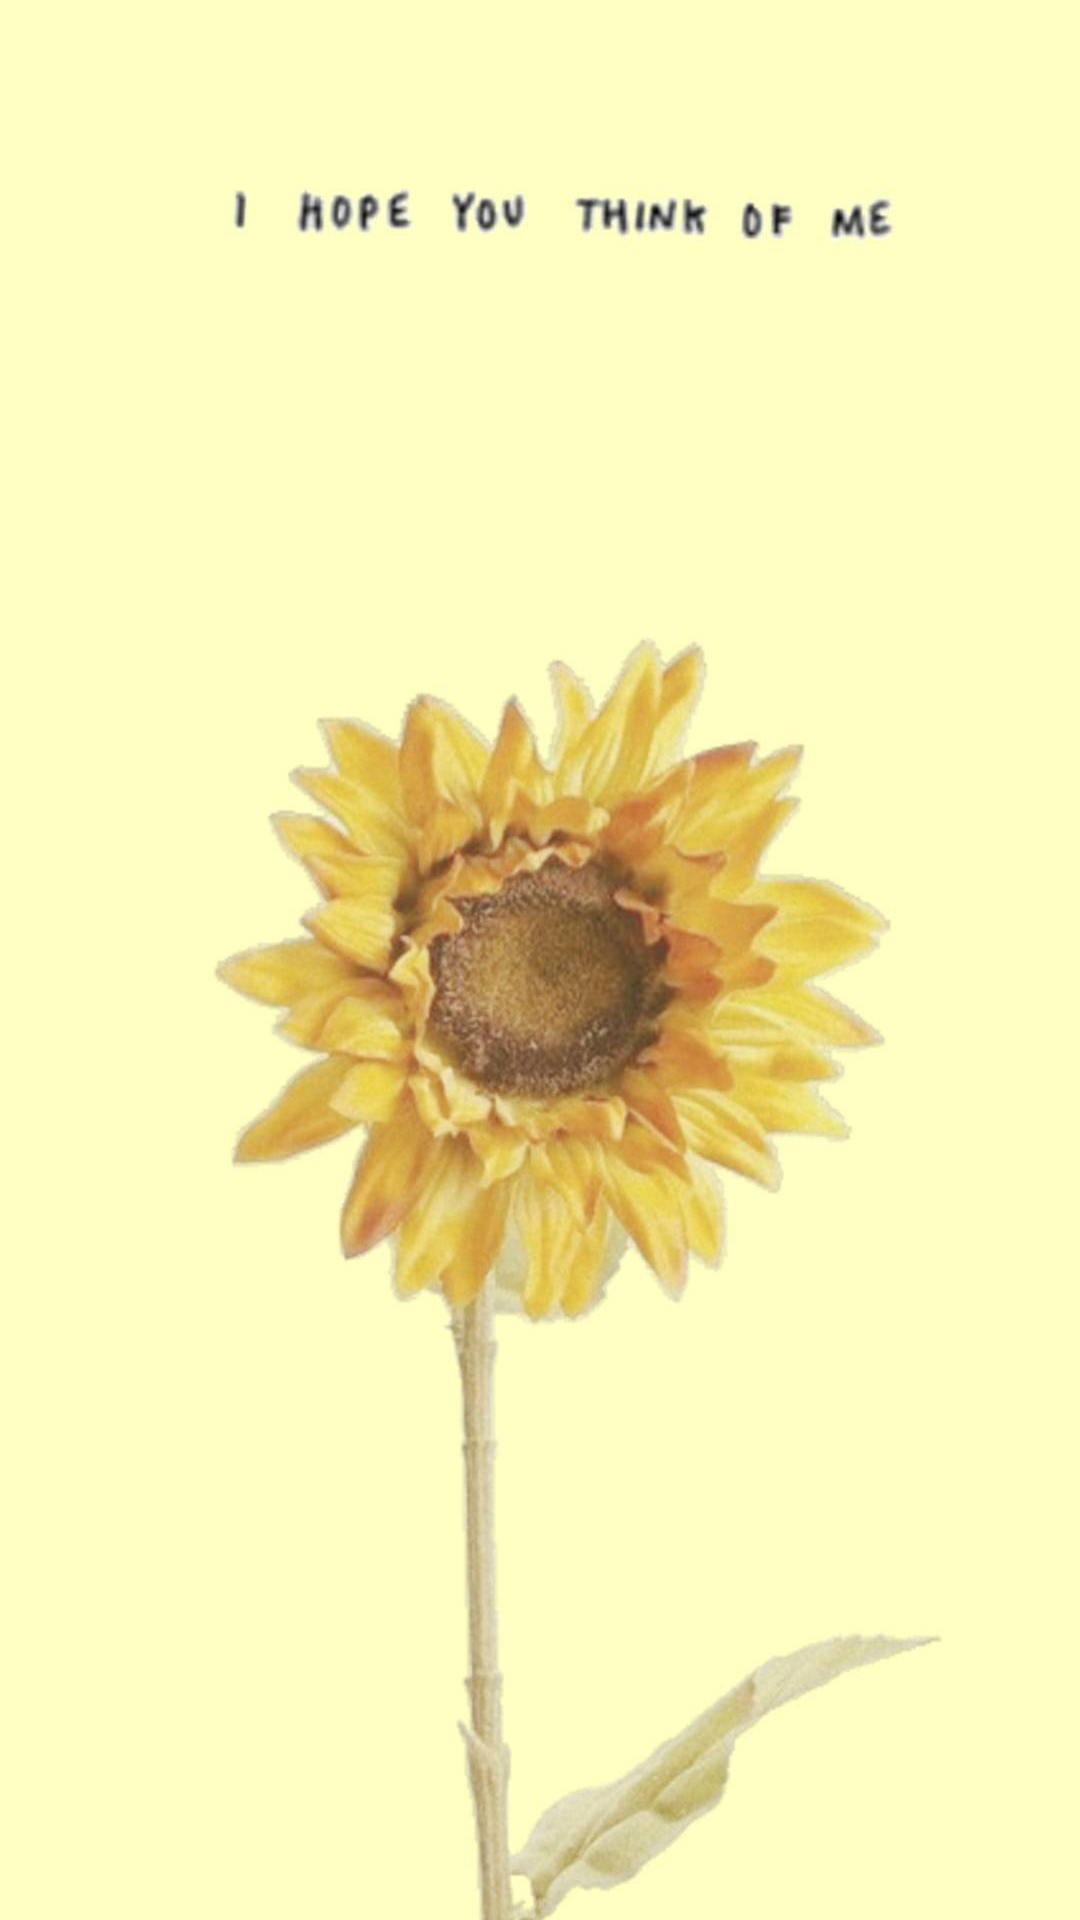 Top 999+ Sunflower Iphone Wallpaper Full HD, 4K✓Free to Use